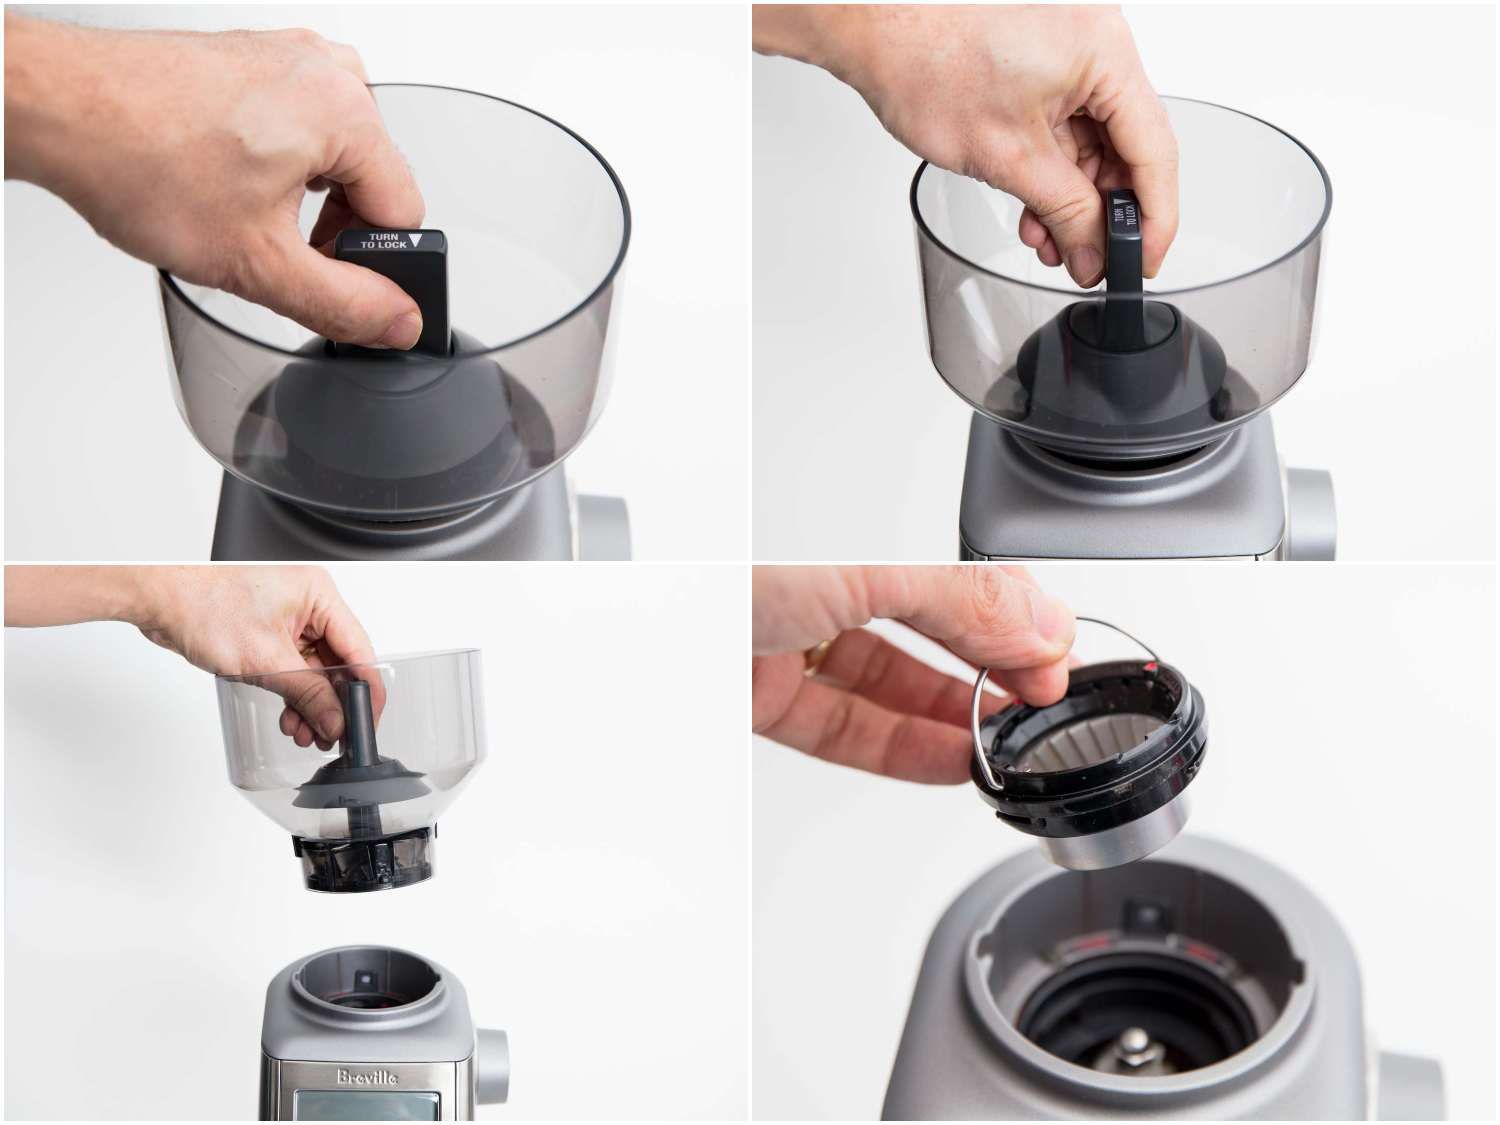 Breville coffee grinder's easy to use hopper and burr assembly